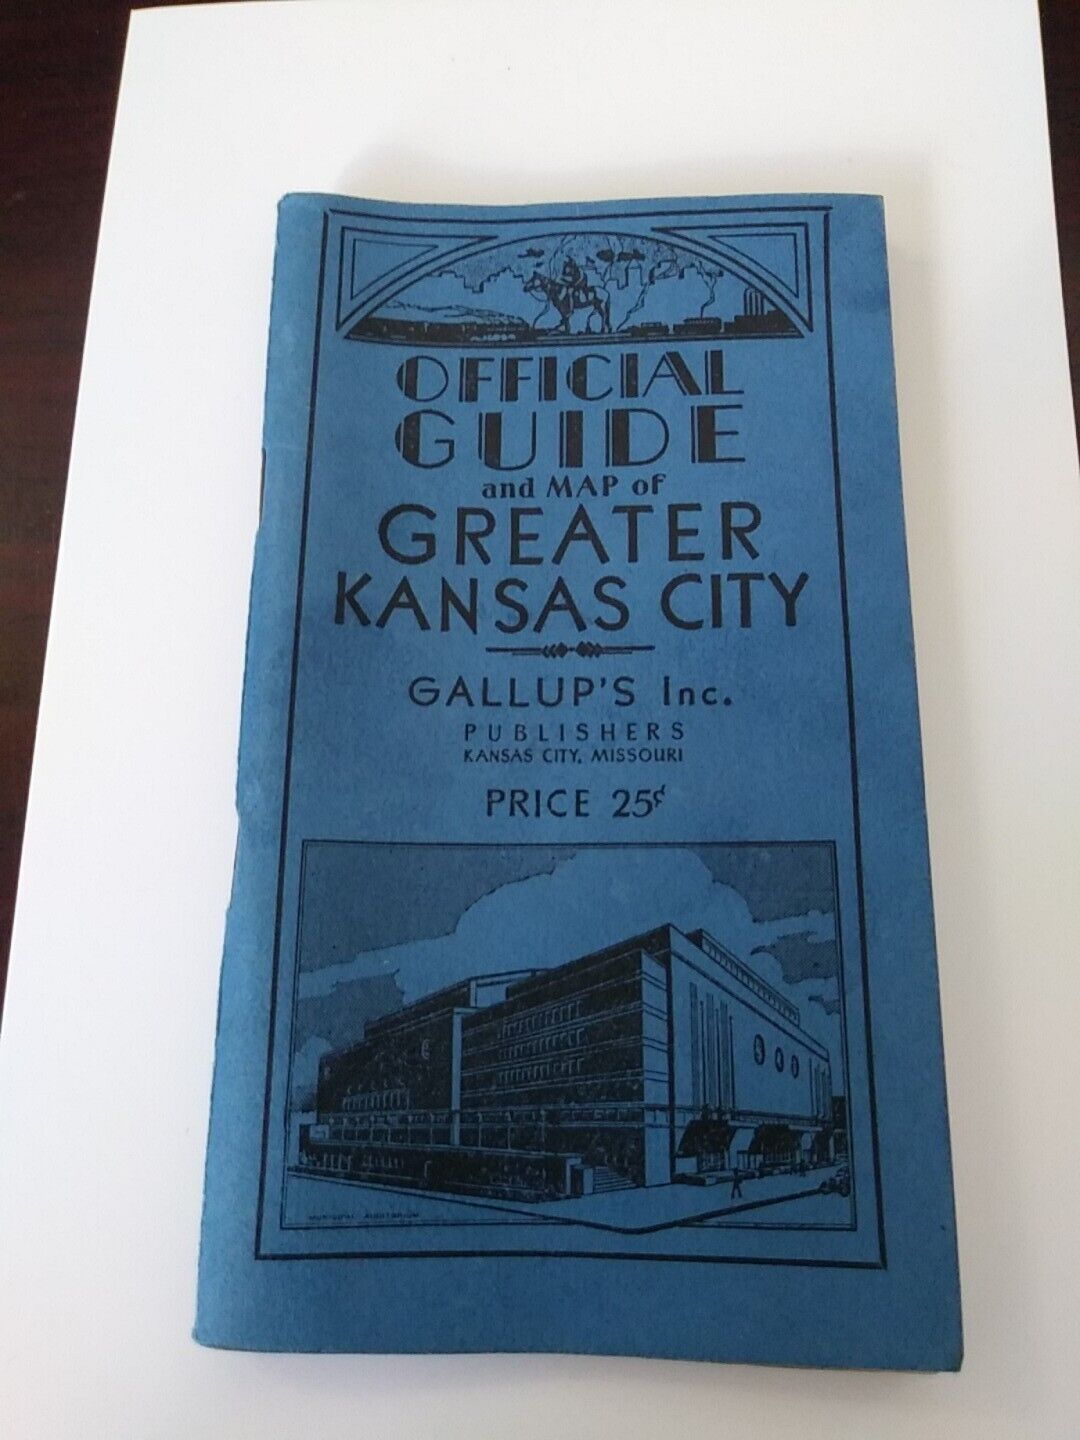 Vintage Gallup\'s Official Guide and Map of Greater Kansas City**MAP ATTACHED**